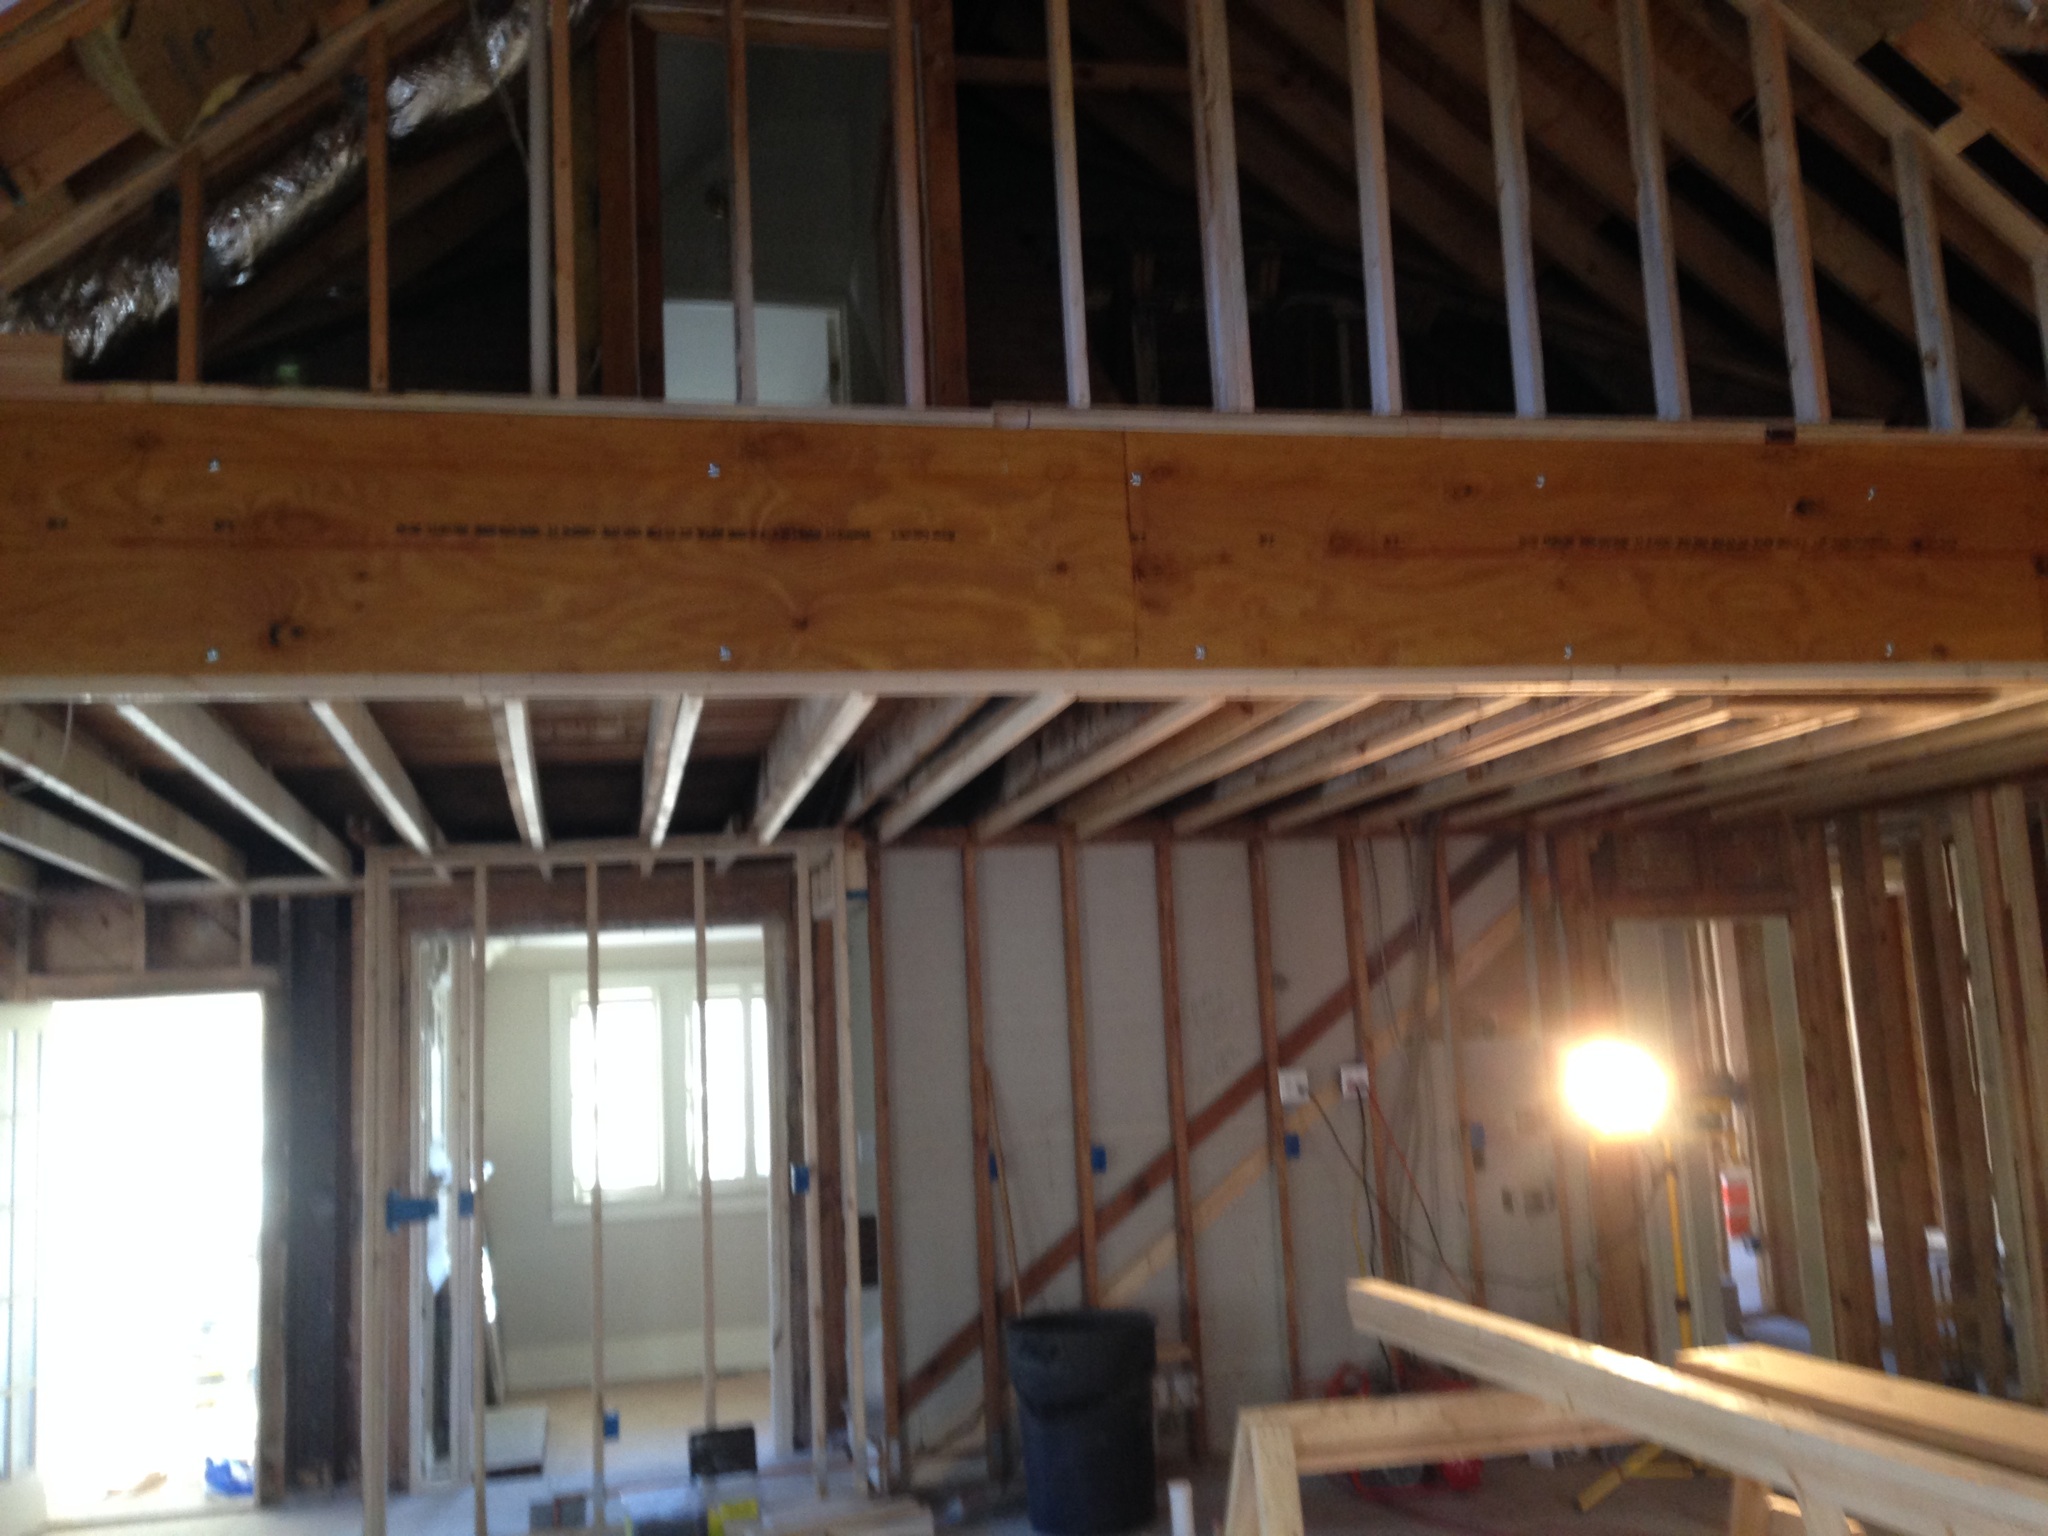  General Contractor American Craftsman Renovations provides Structural Repairs for Homes in Savannah